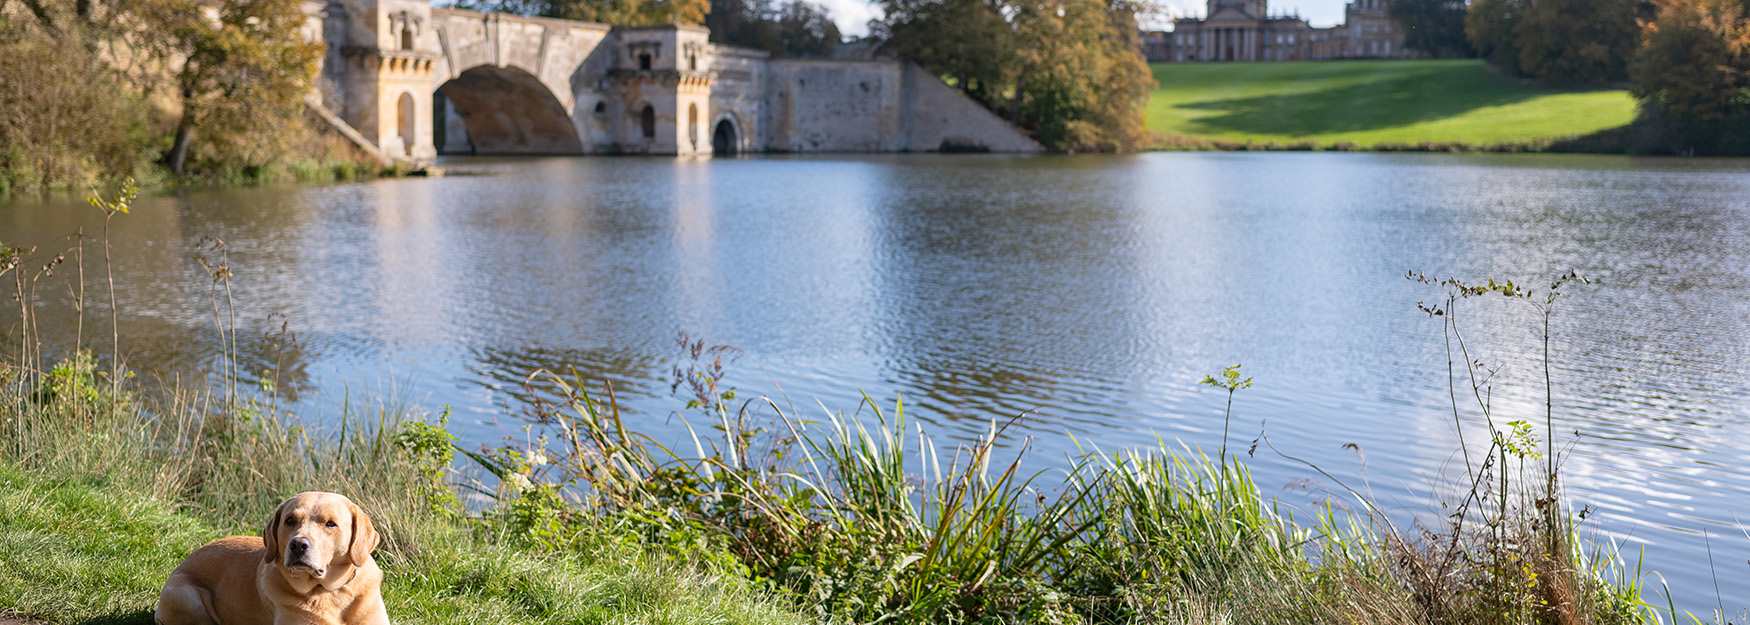 Looking across the lake to Blenheim Palace